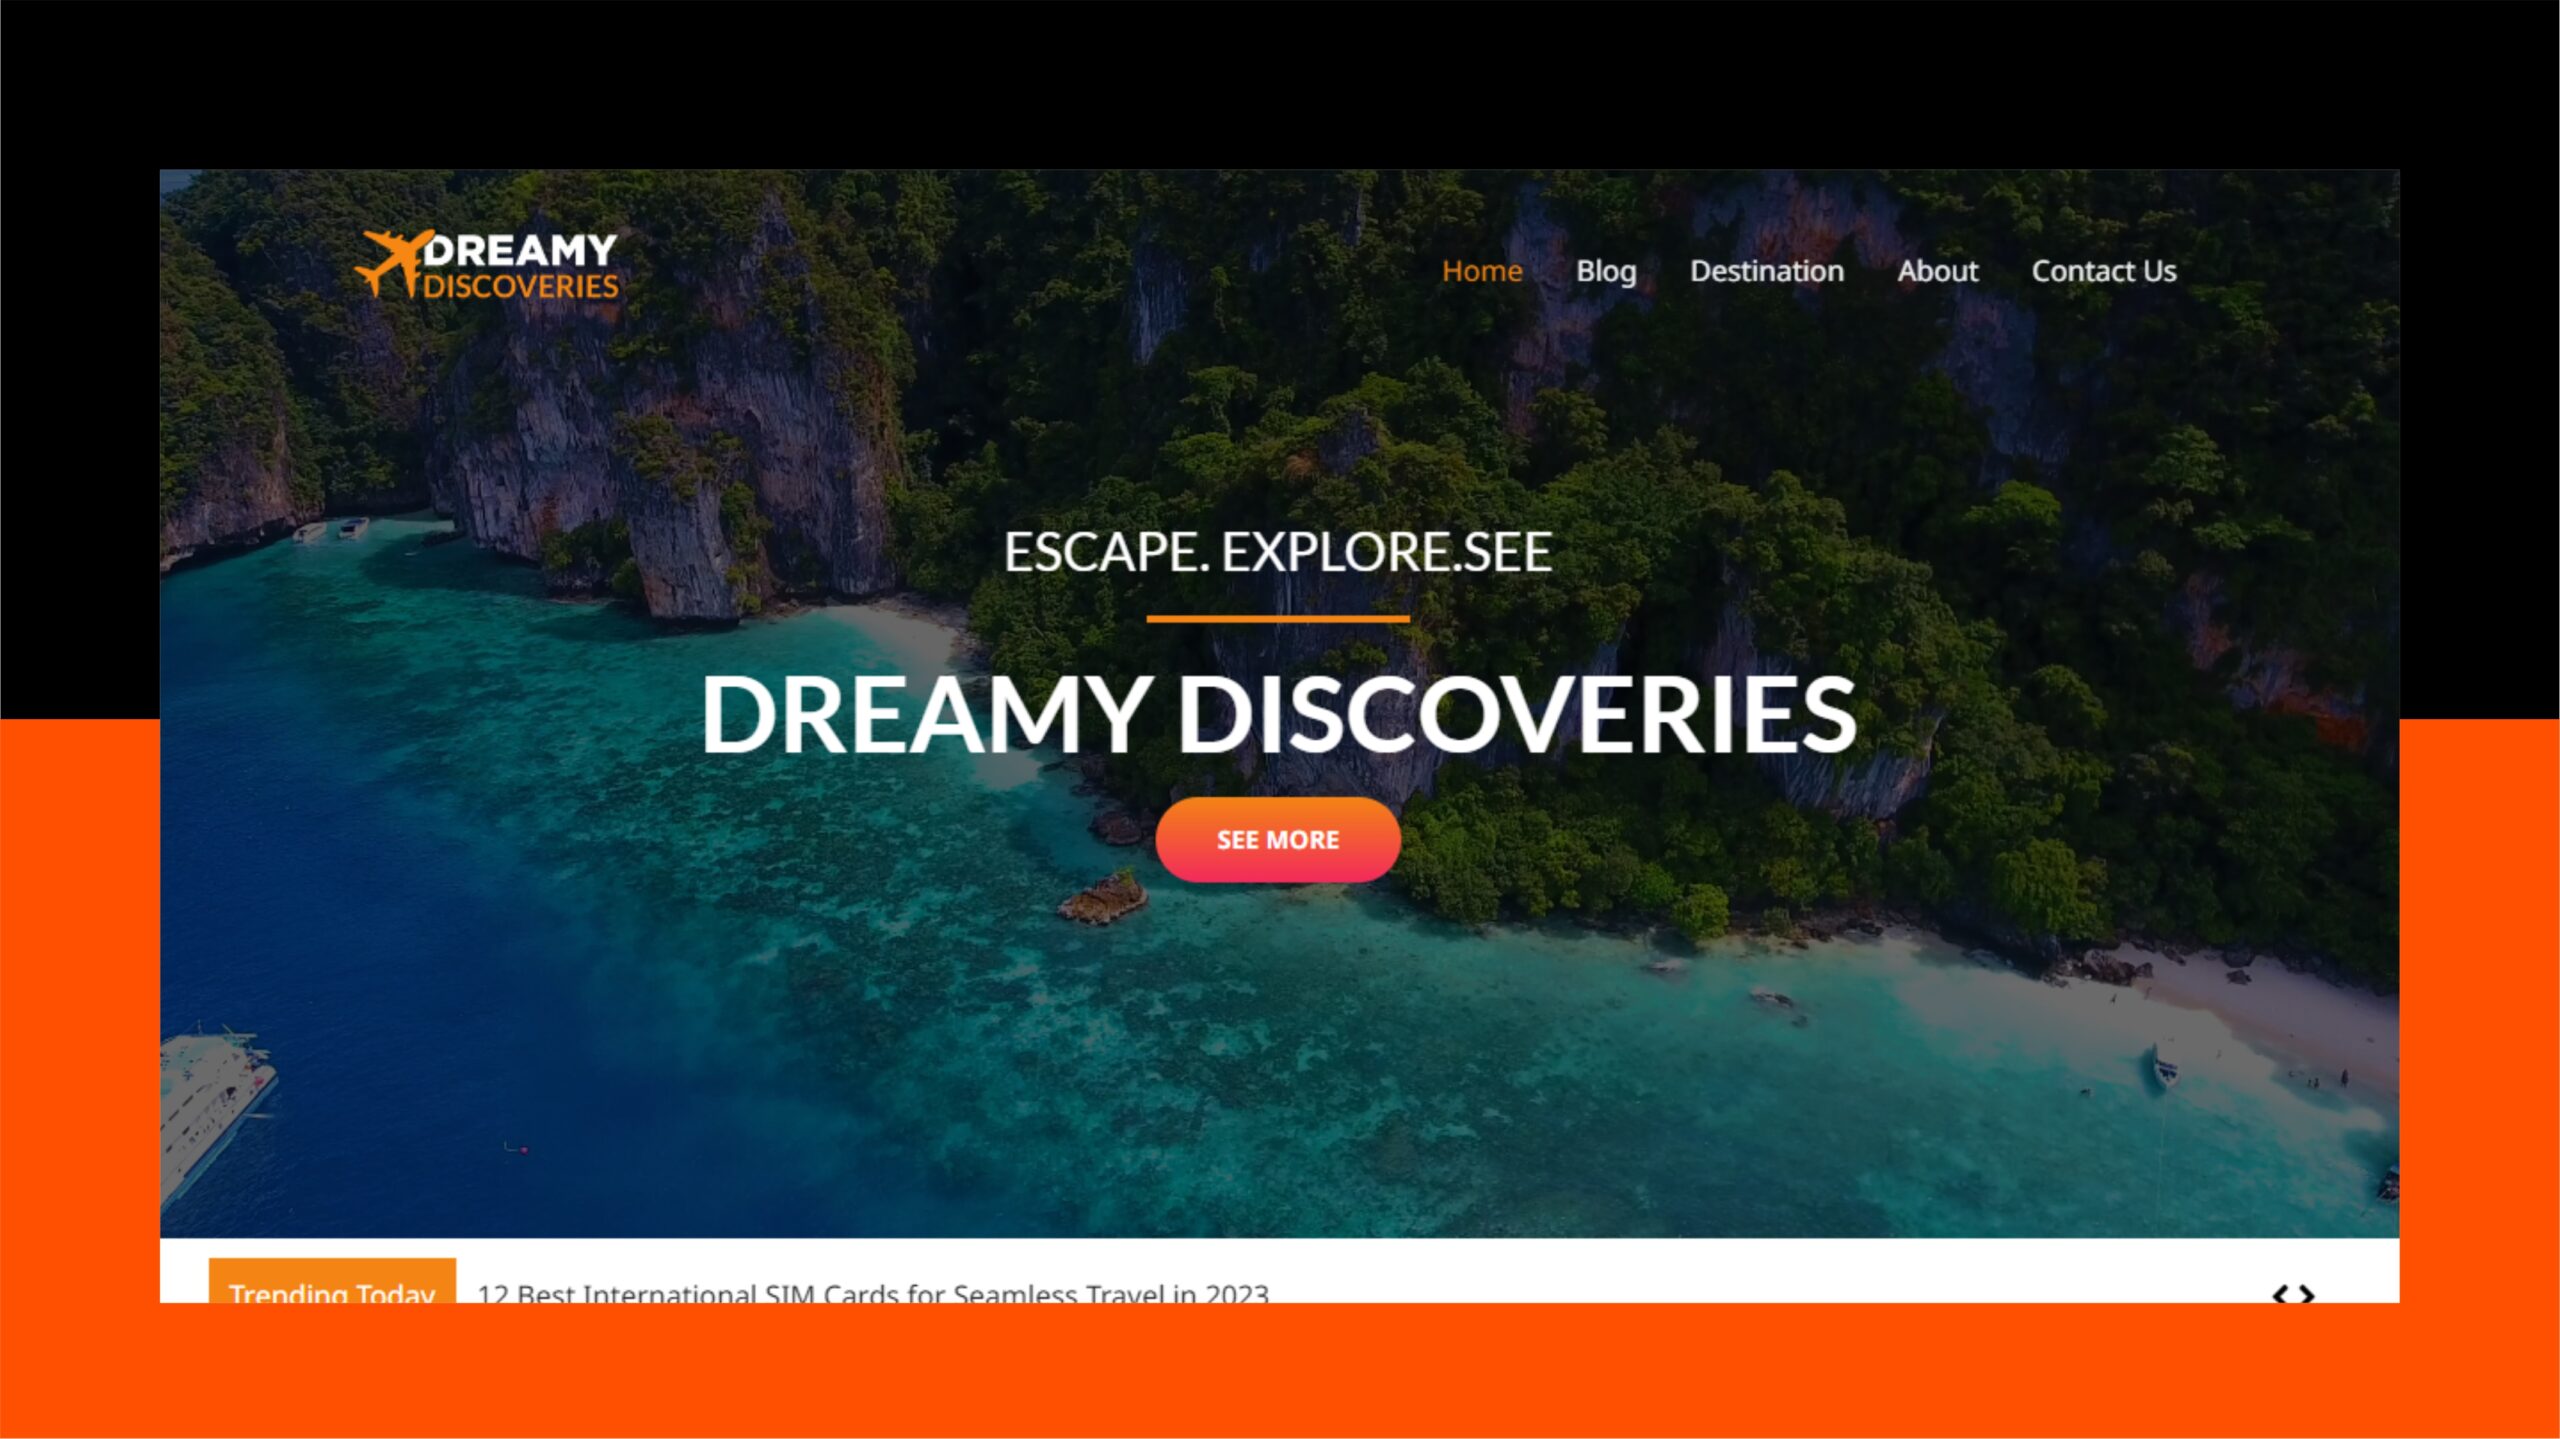 Dreamy Discoveries